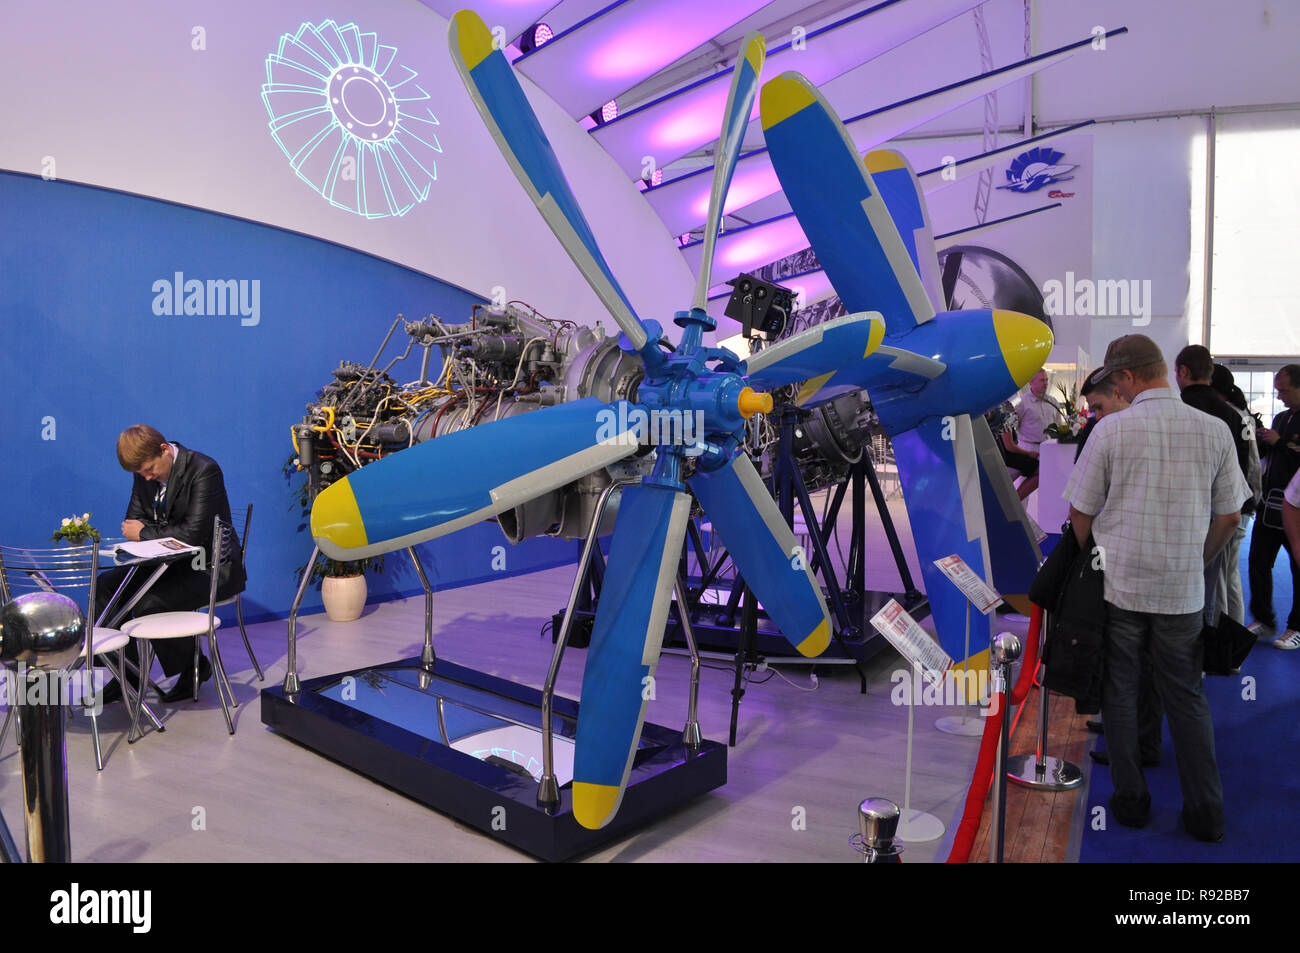 Zhukovsky, Russia. 20 August 2011. Air show MAKS-2011. Exhibition of aircraft and equipment in the hangar. Turboprop aircraft engine TVD-20-01 and TV7 Stock Photo